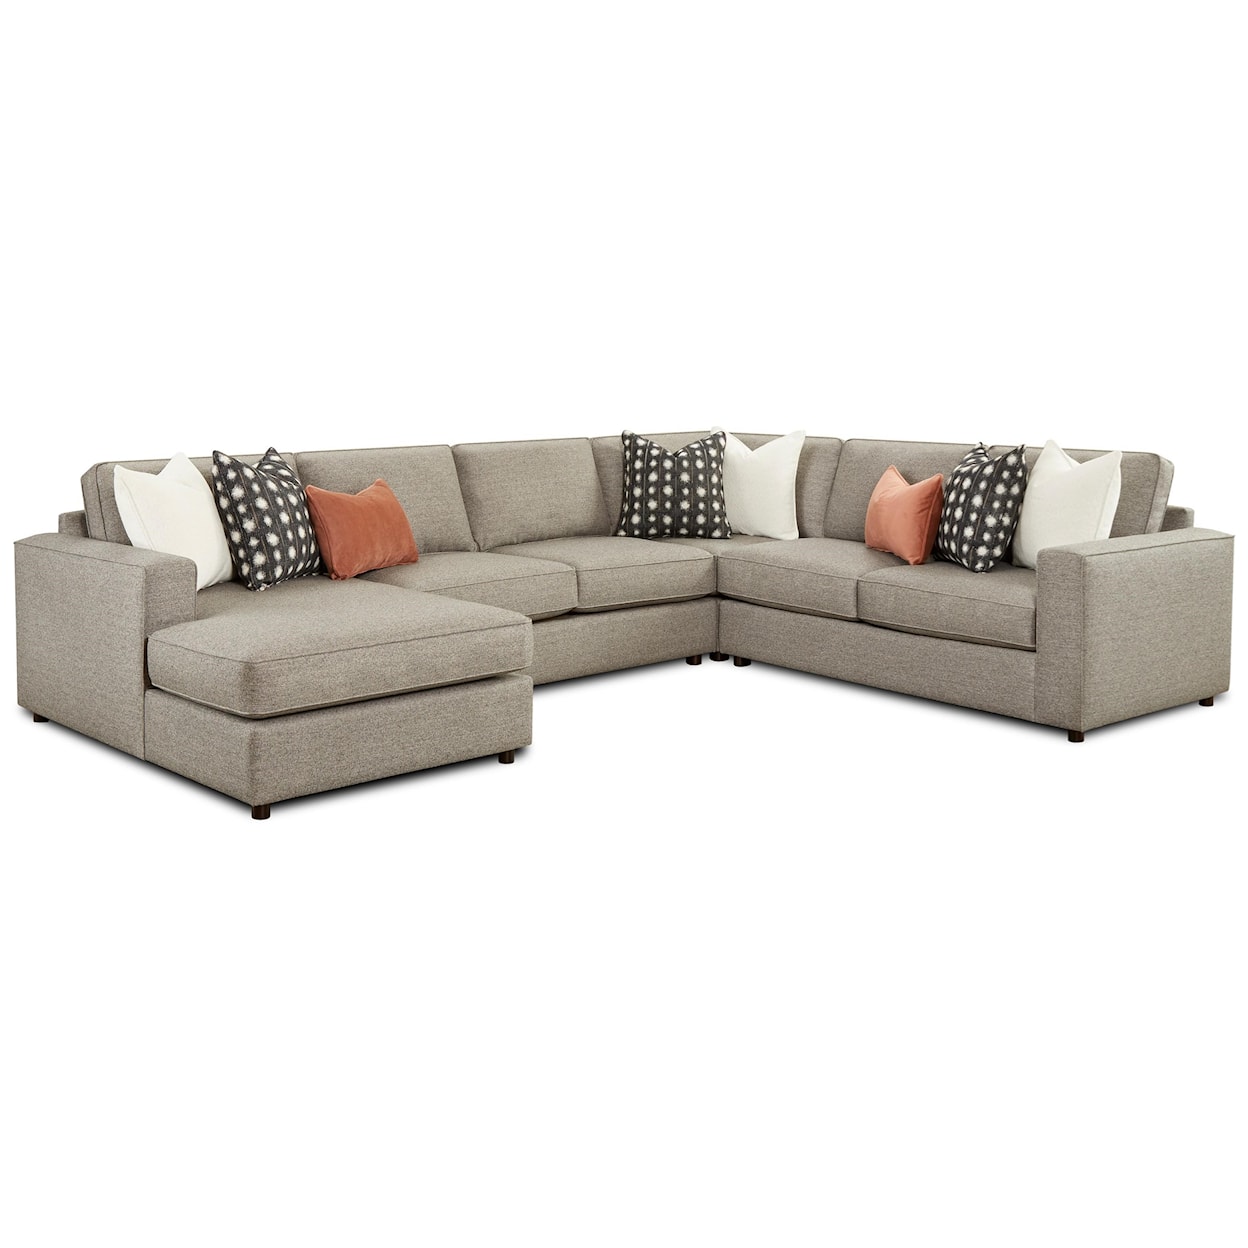 VFM Signature 2061 MONROE ASH 4-Piece Sectional with Chaise